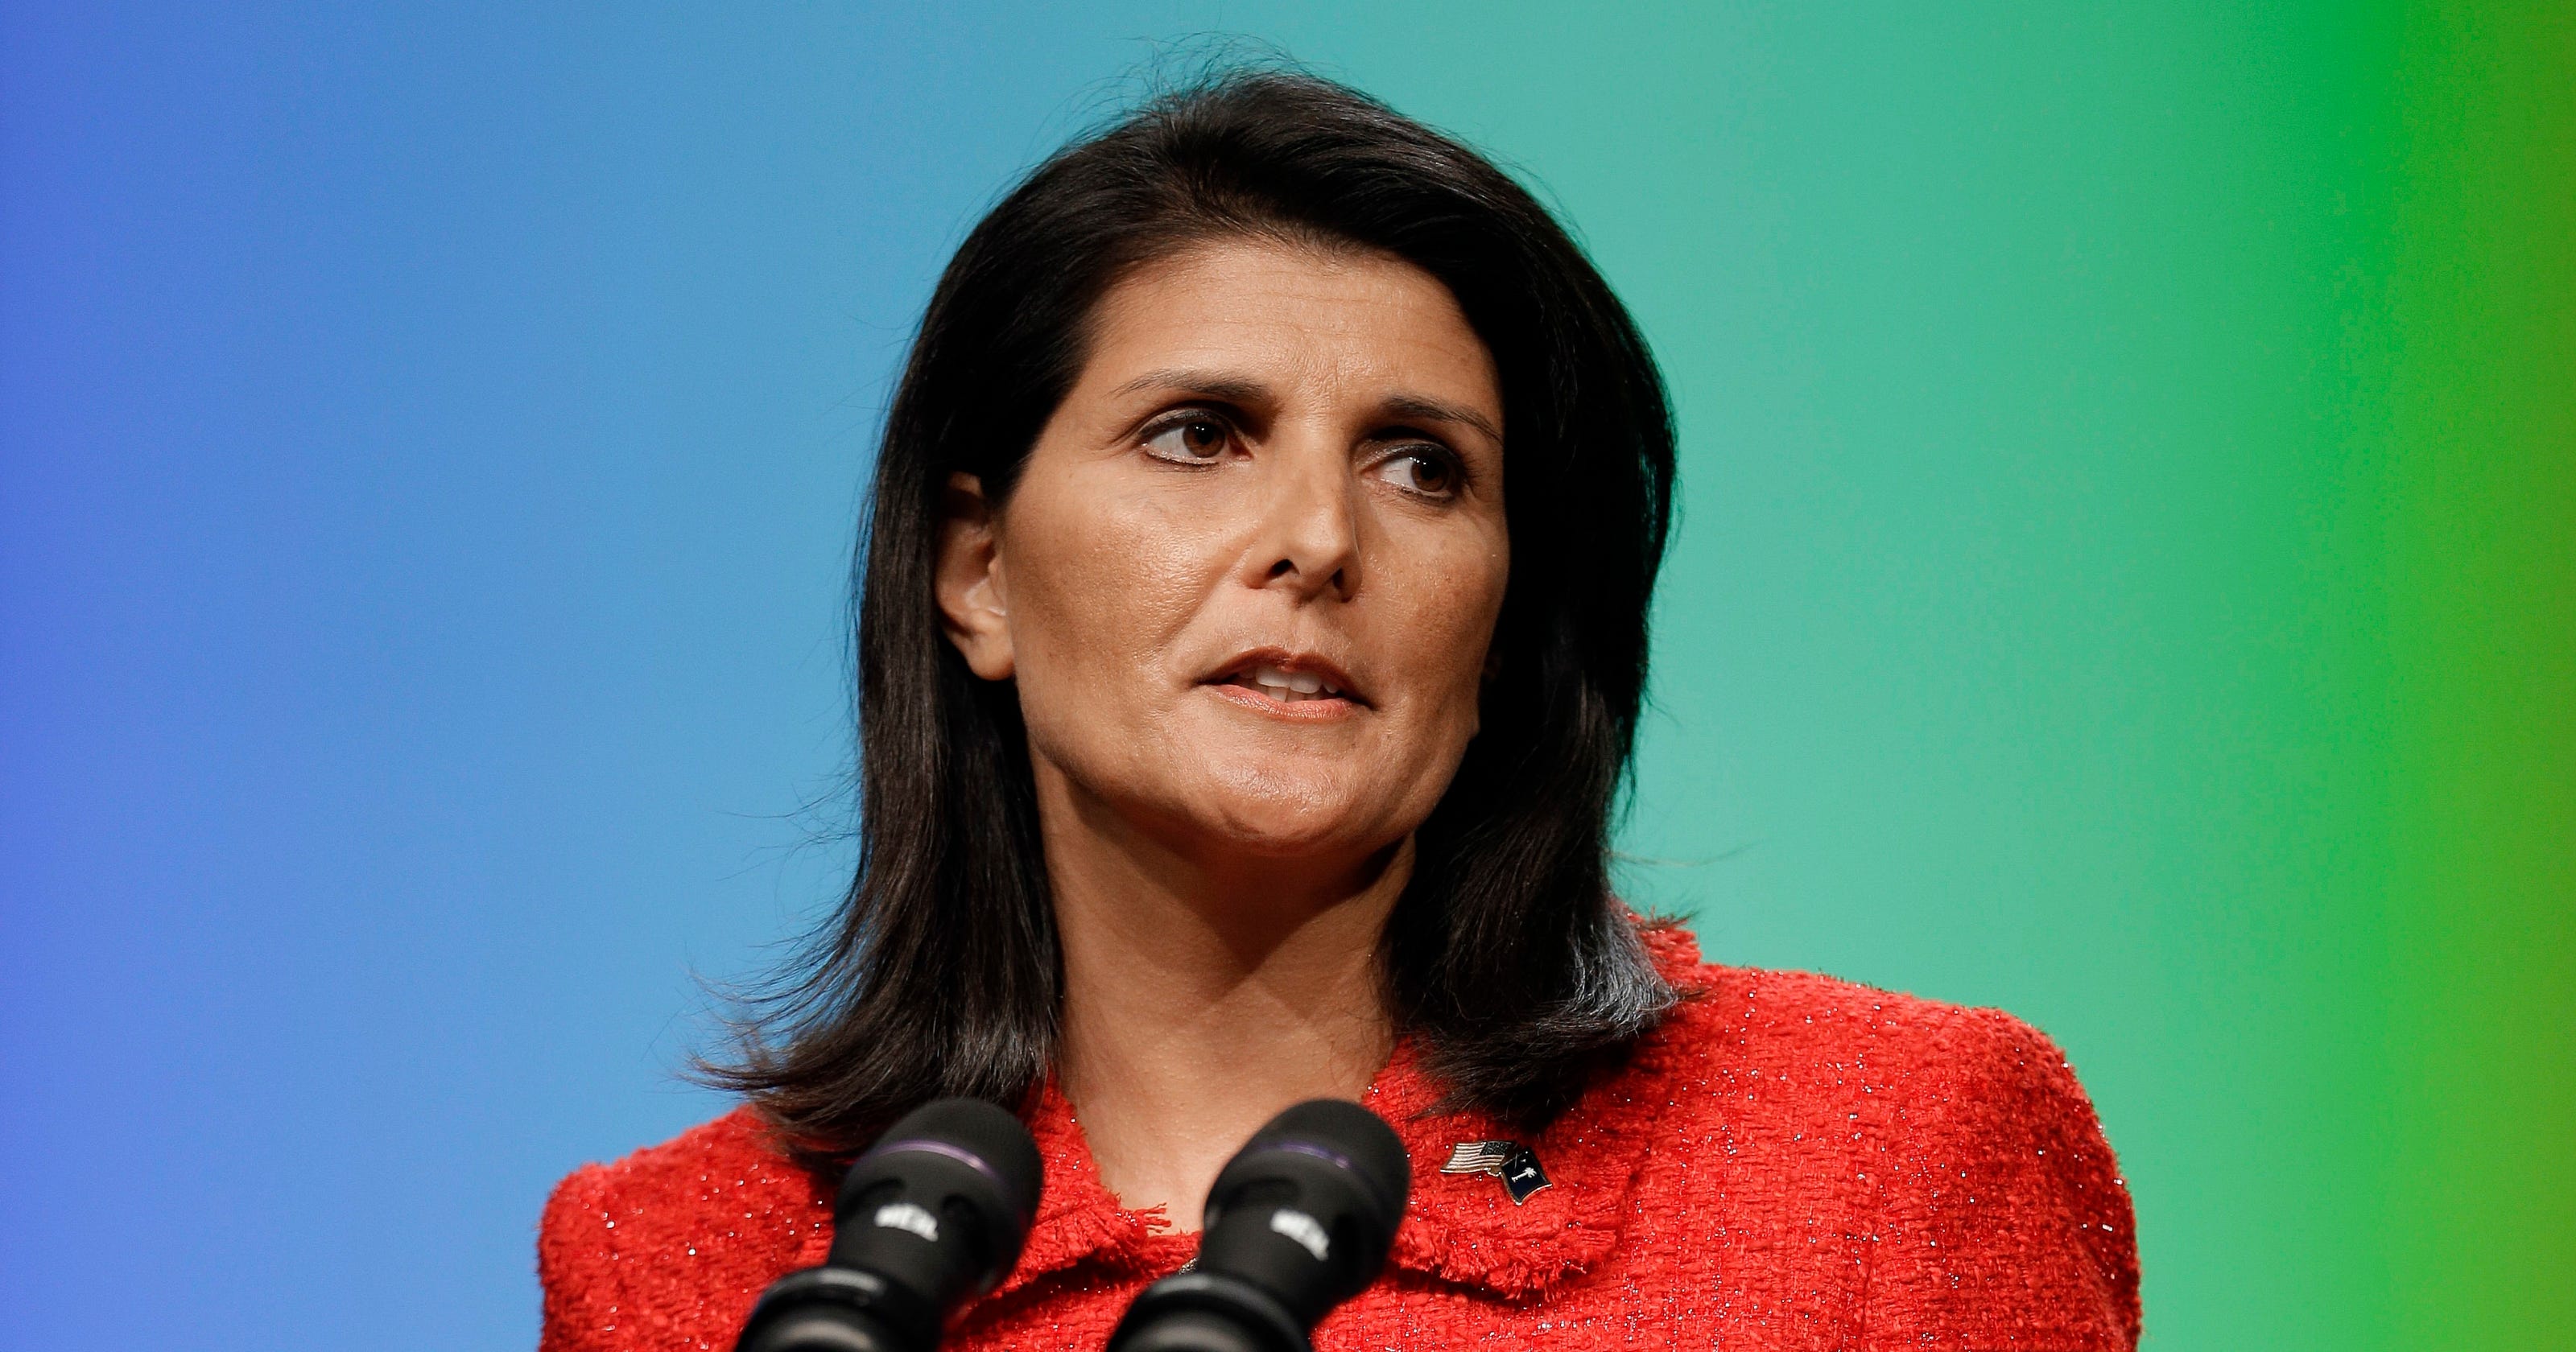 Could Nikki Haley America's first female president in 2024?